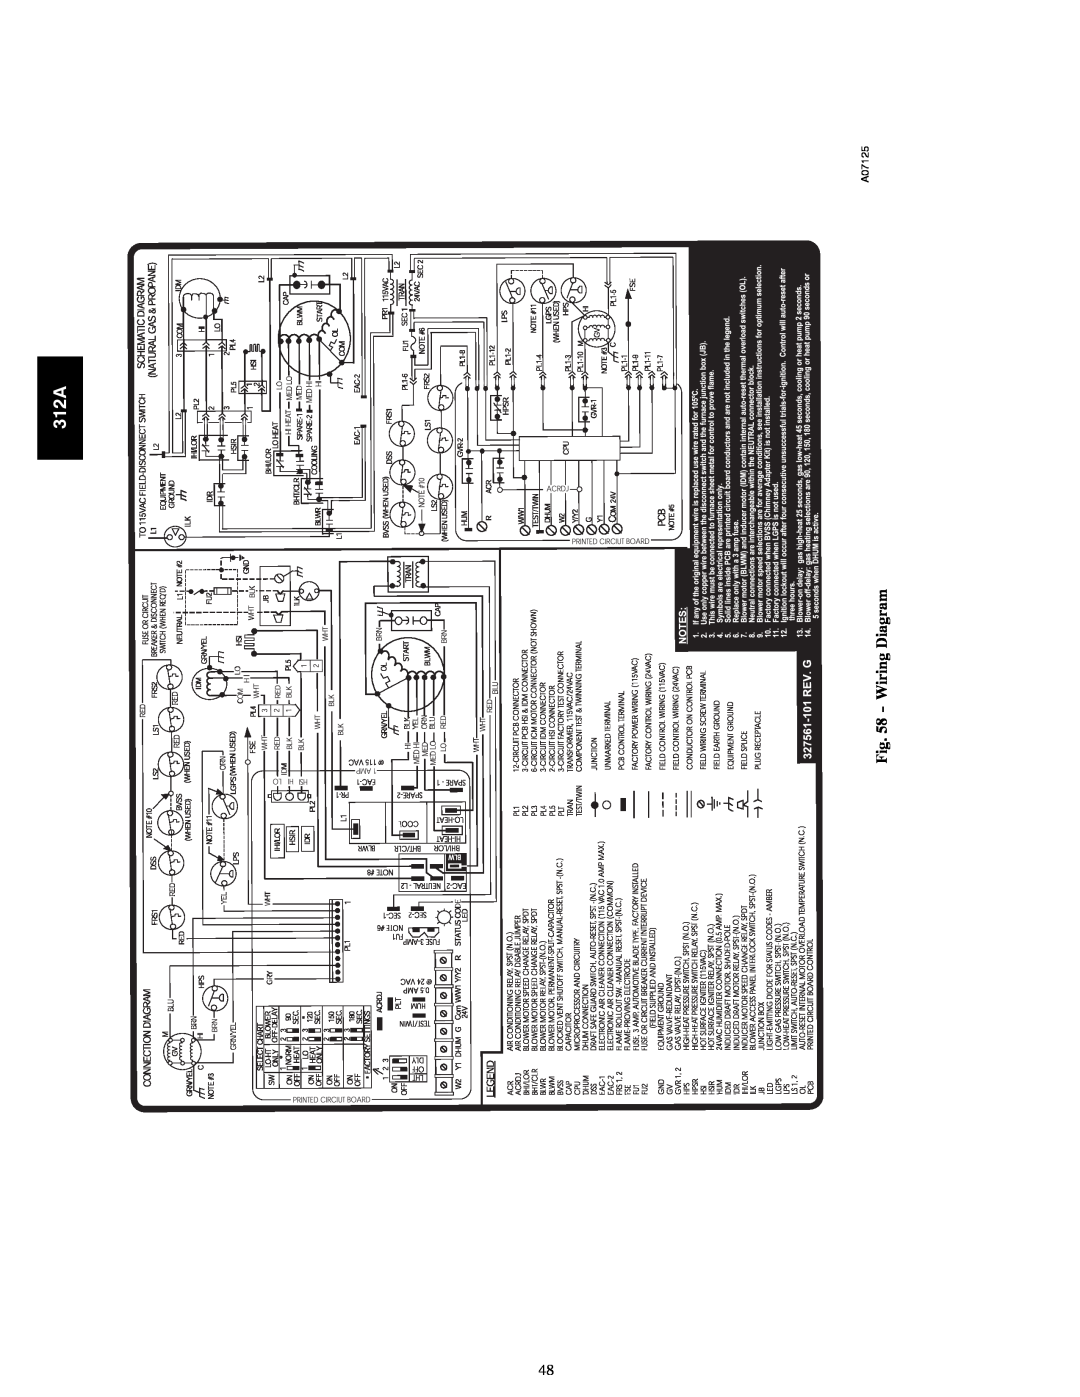 Bryant 120 instruction manual Wiring Diagram, 312A, A07125 